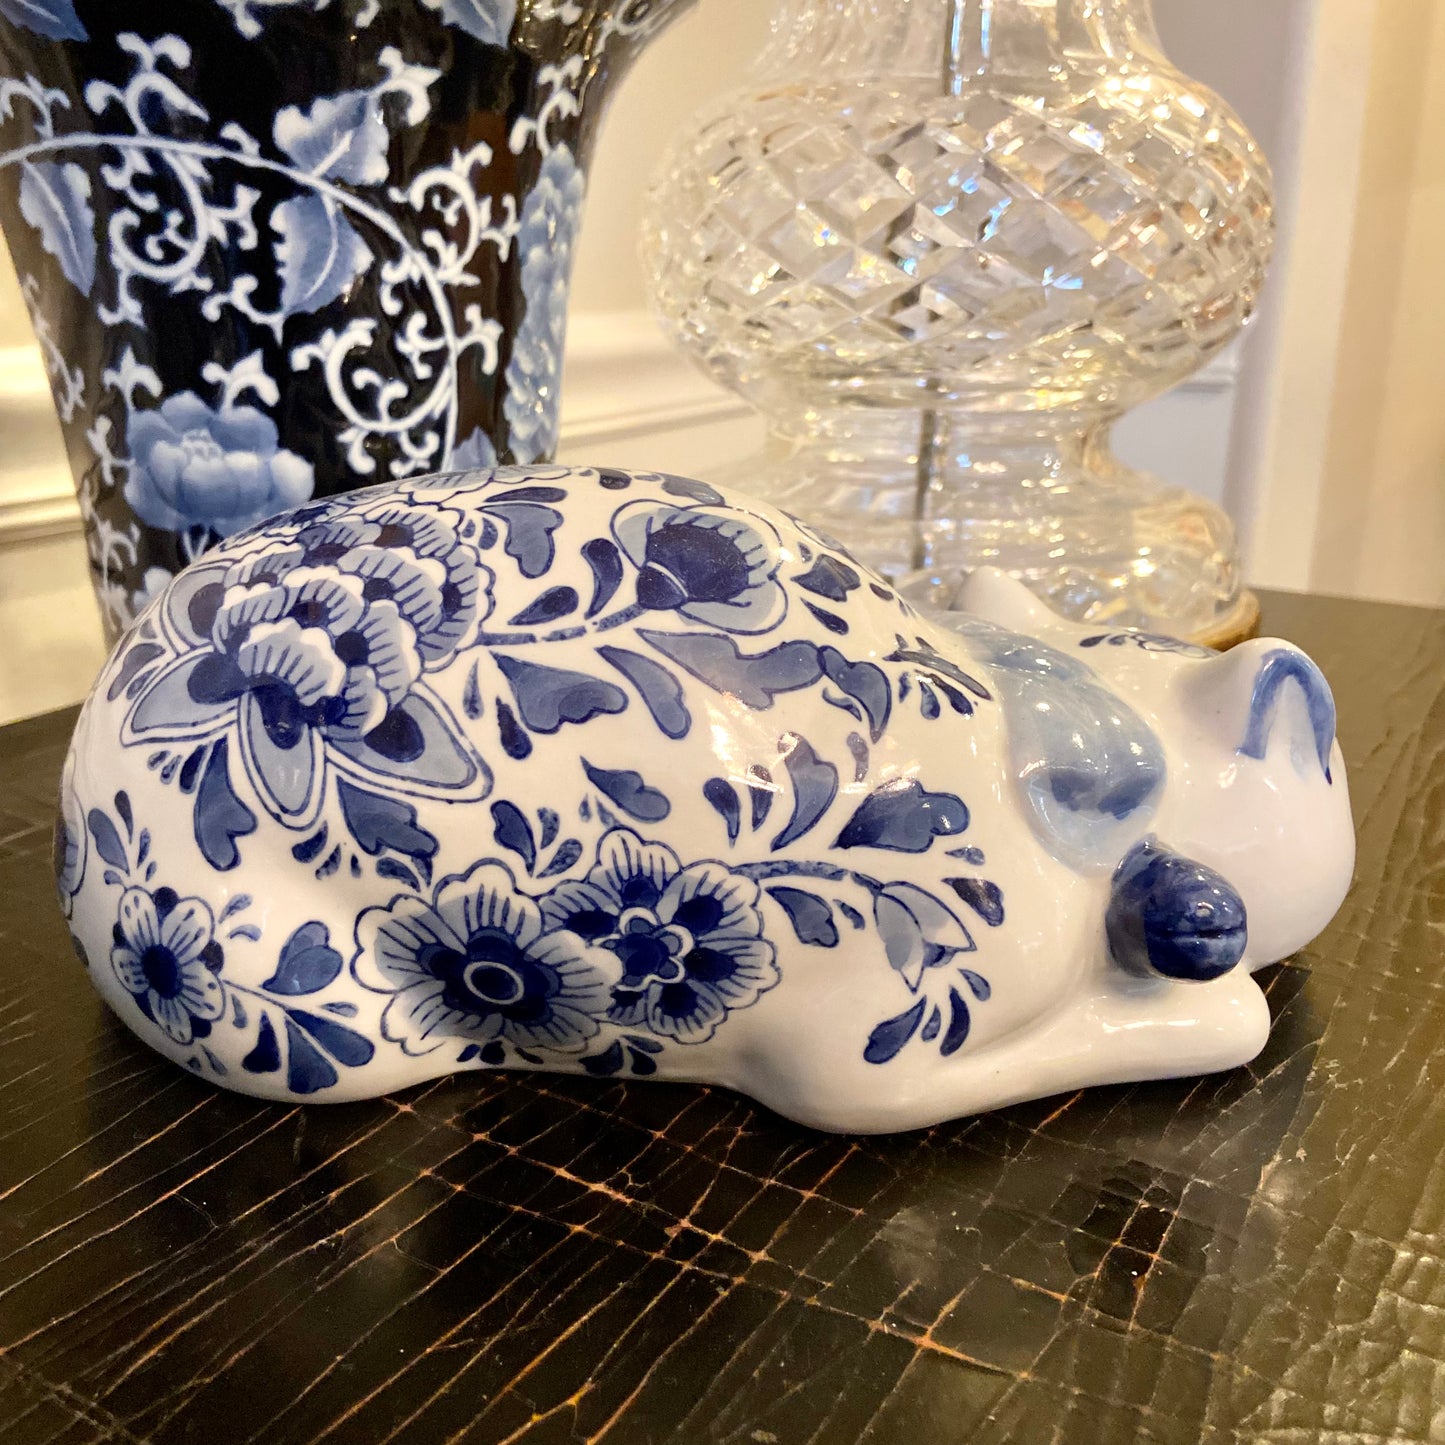 Vintage blue & white chinoiserie large laying down  kitty cat statue